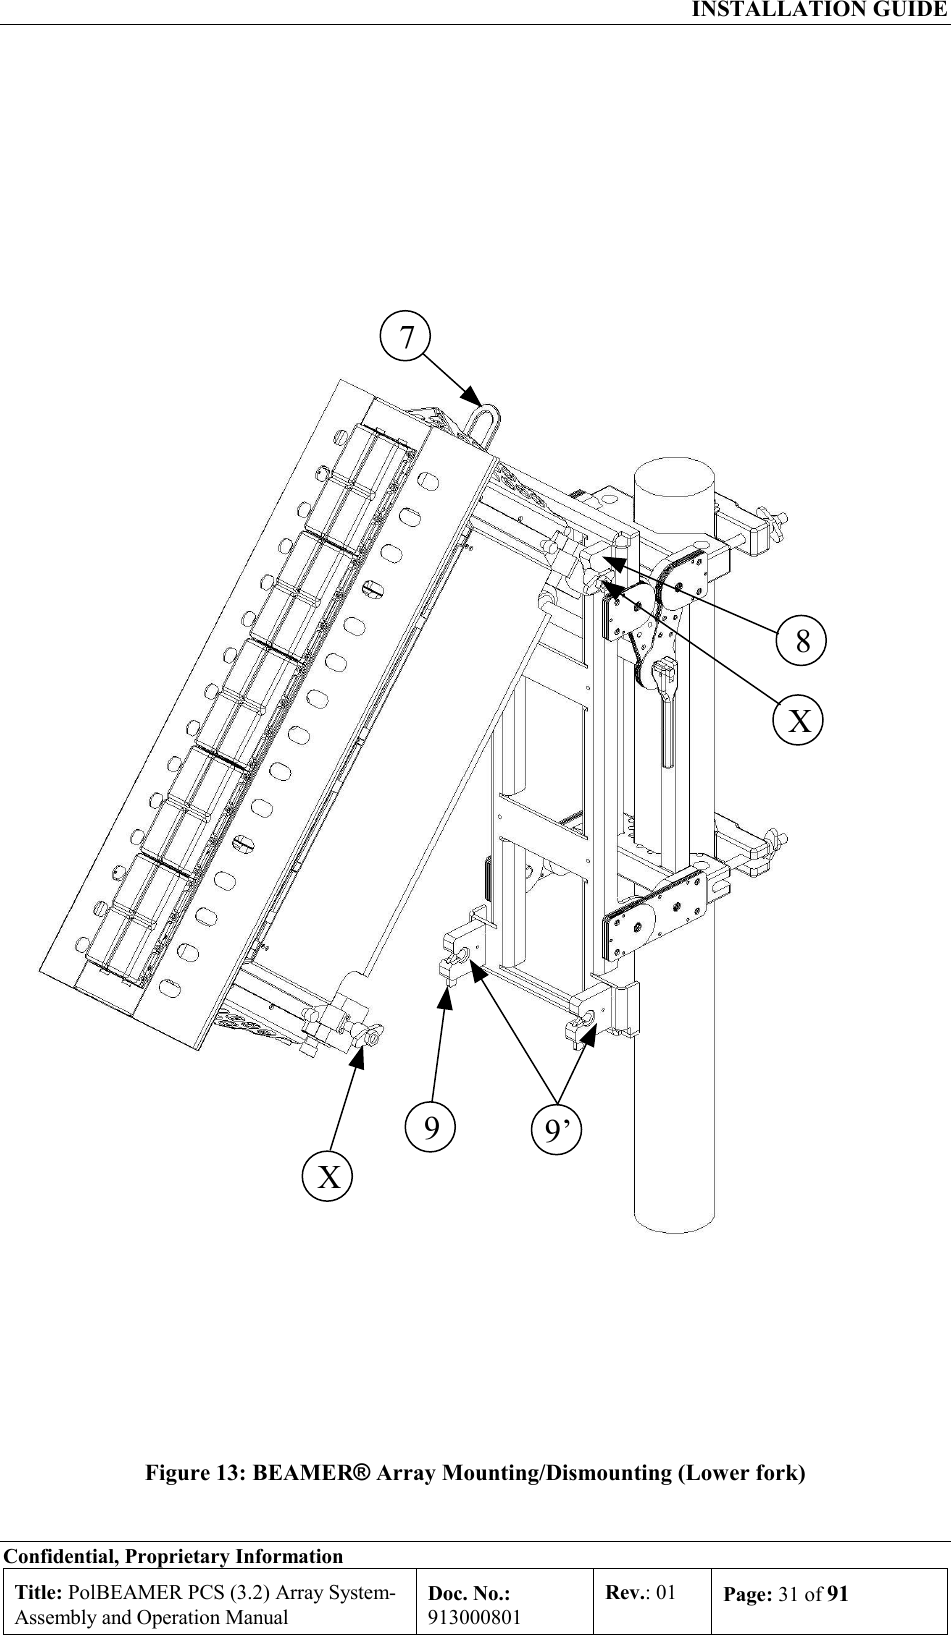  INSTALLATION GUIDE Confidential, Proprietary Information Title: PolBEAMER PCS (3.2) Array System- Assembly and Operation Manual Doc. No.: 913000801 Rev.: 01  Page: 31 of 91                                   Figure 13: BEAMER® Array Mounting/Dismounting (Lower fork)X  9  9’  7  8  X  